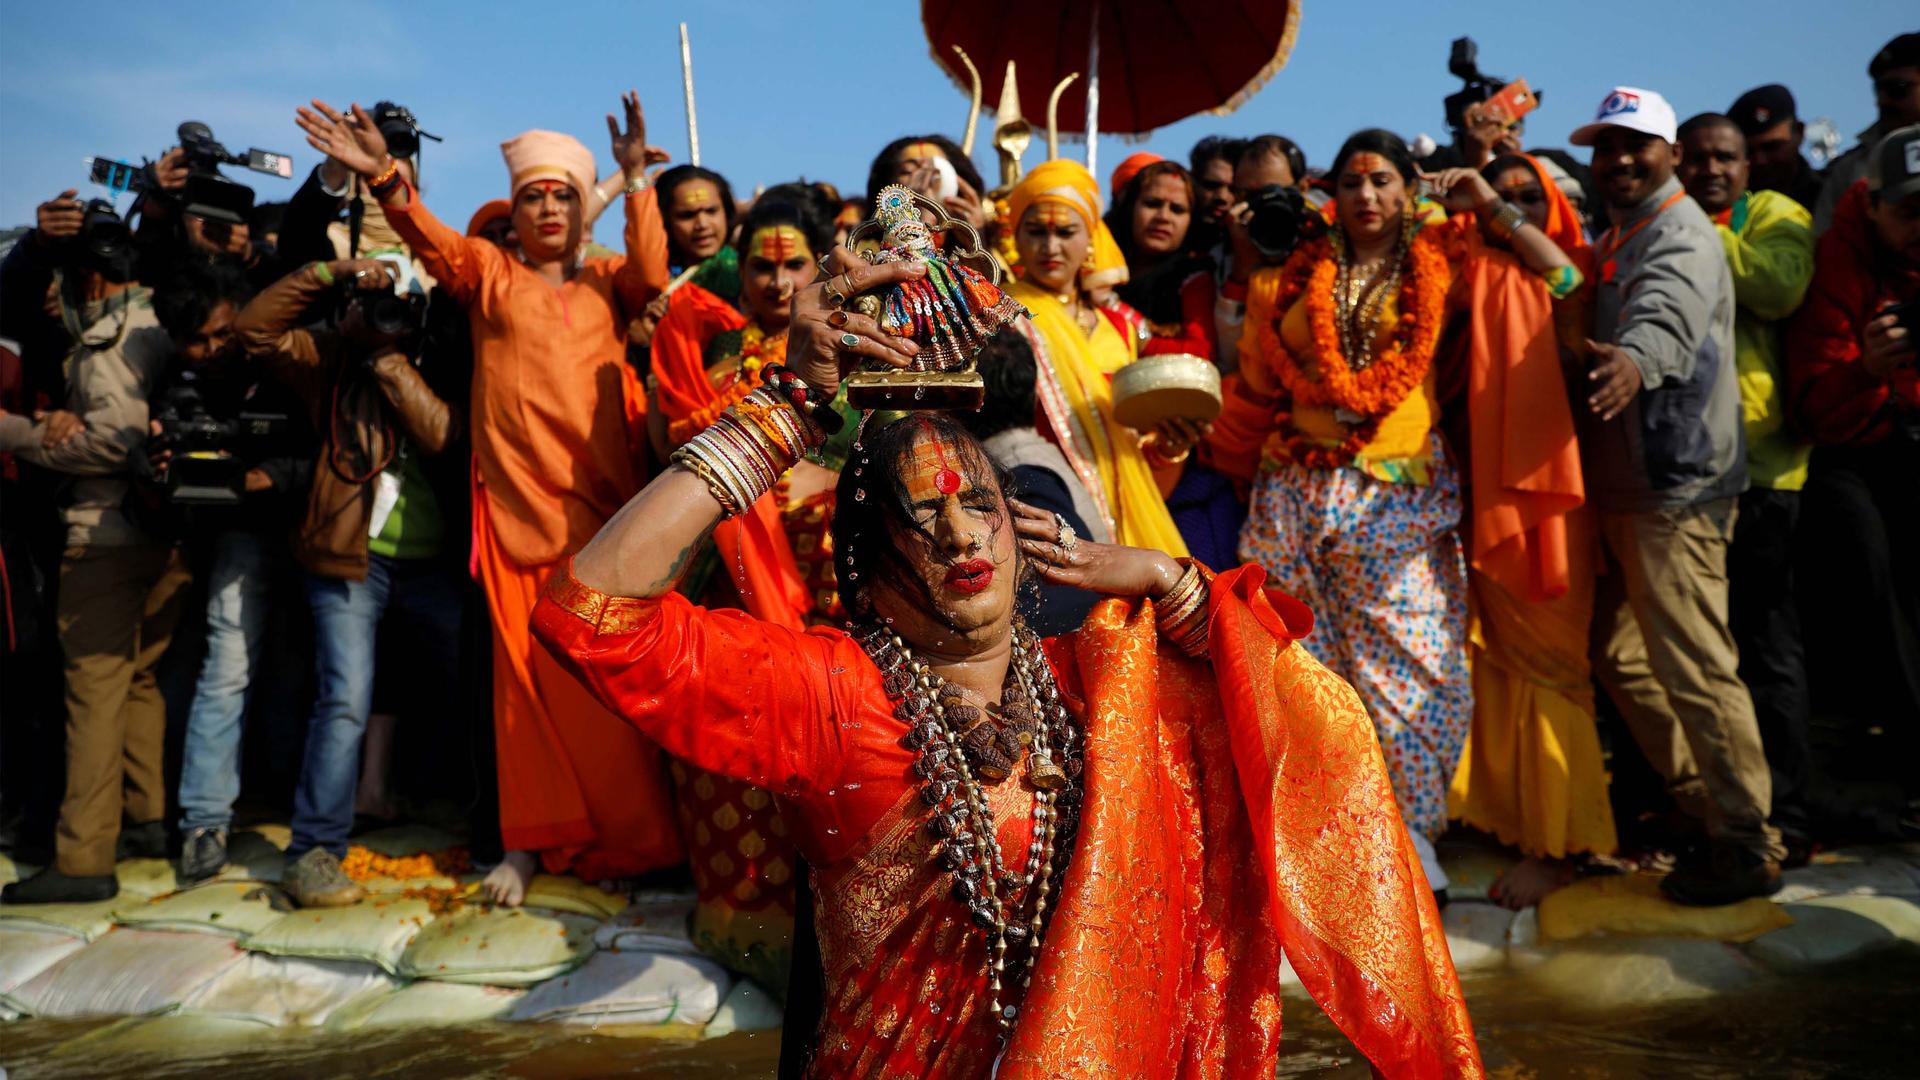 A transgender Indian woman in an orange sari with wet hair in front of a crowd